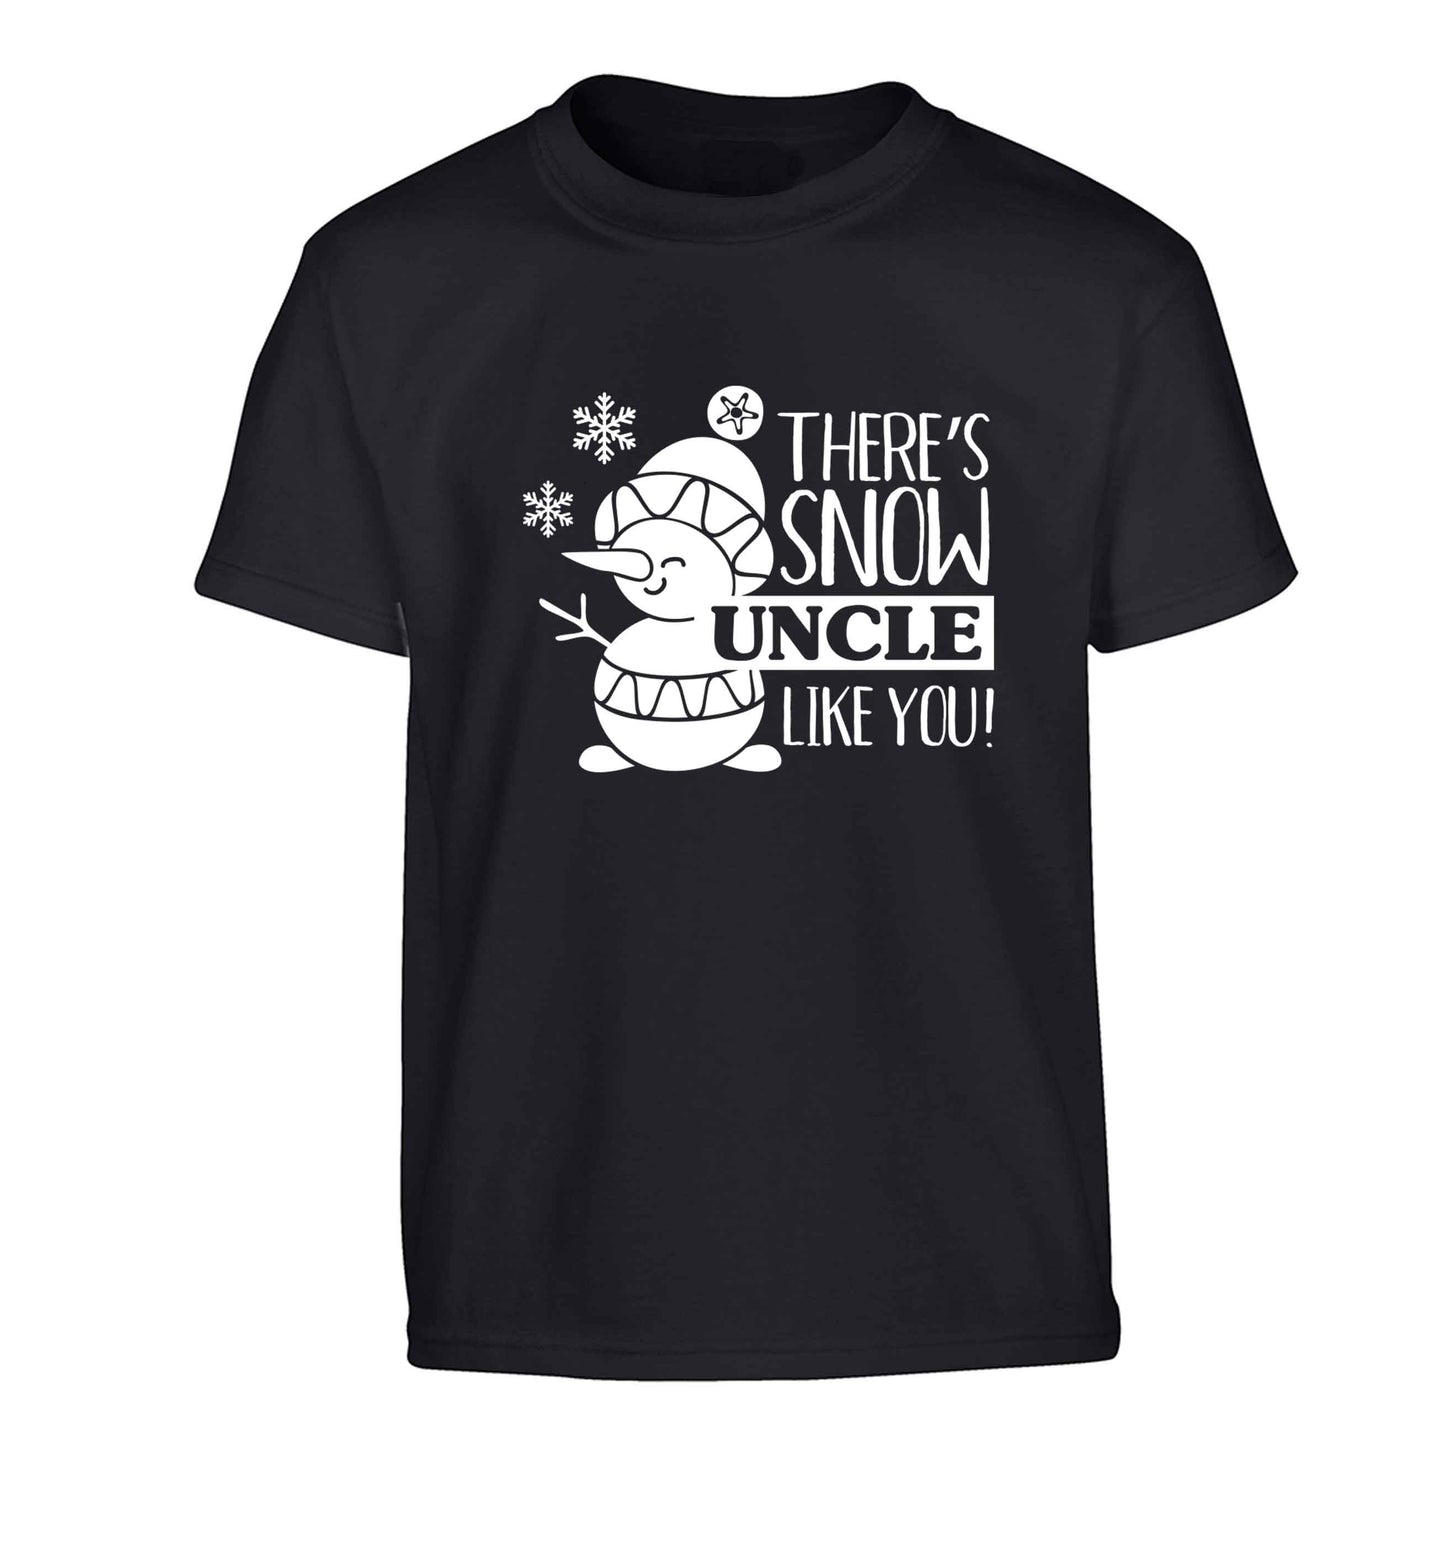 There's snow uncle like you Children's black Tshirt 12-13 Years